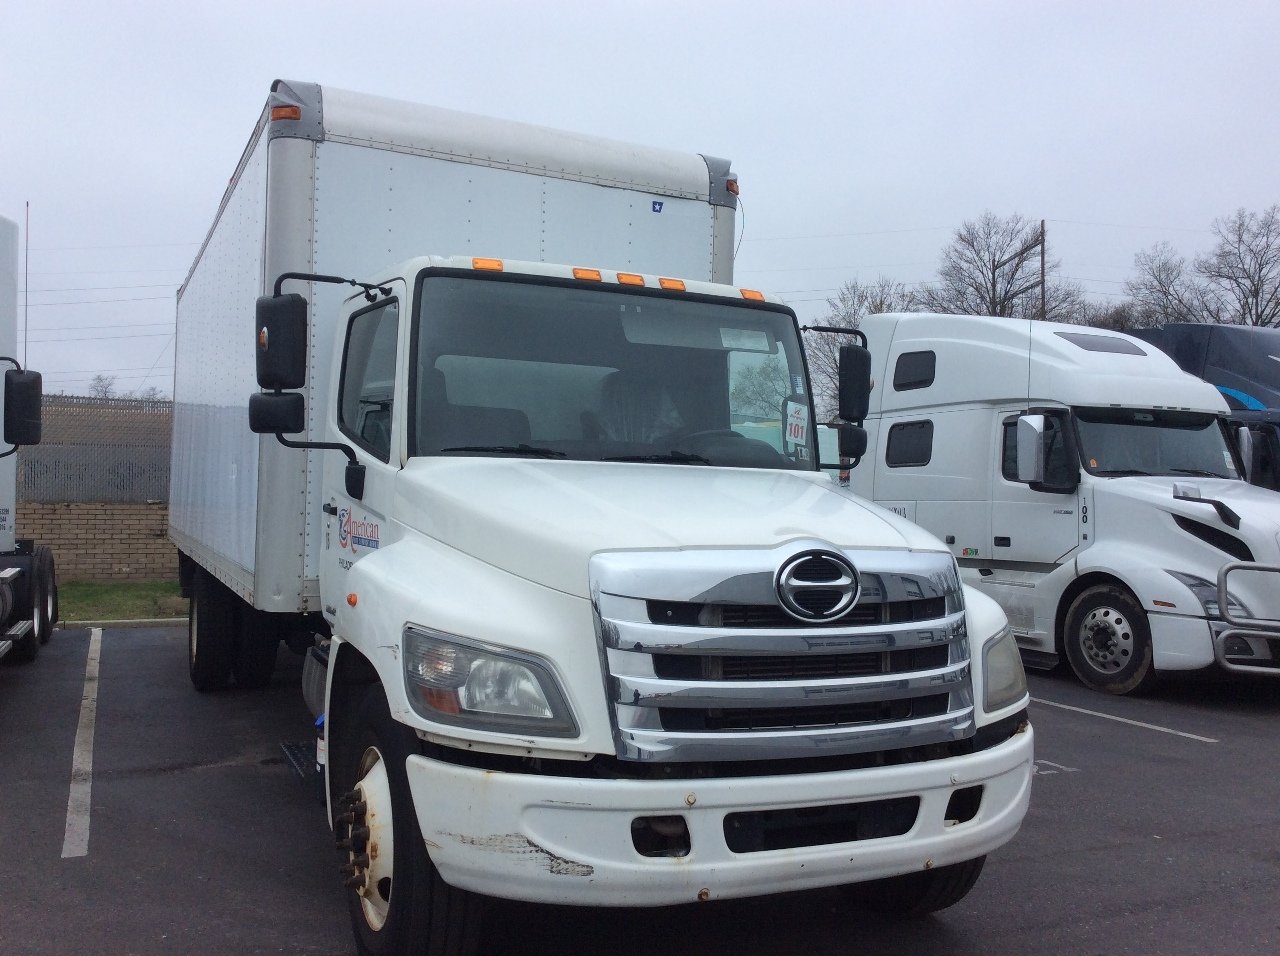 Used Truck Inventory - 1001821 02 2 - 113